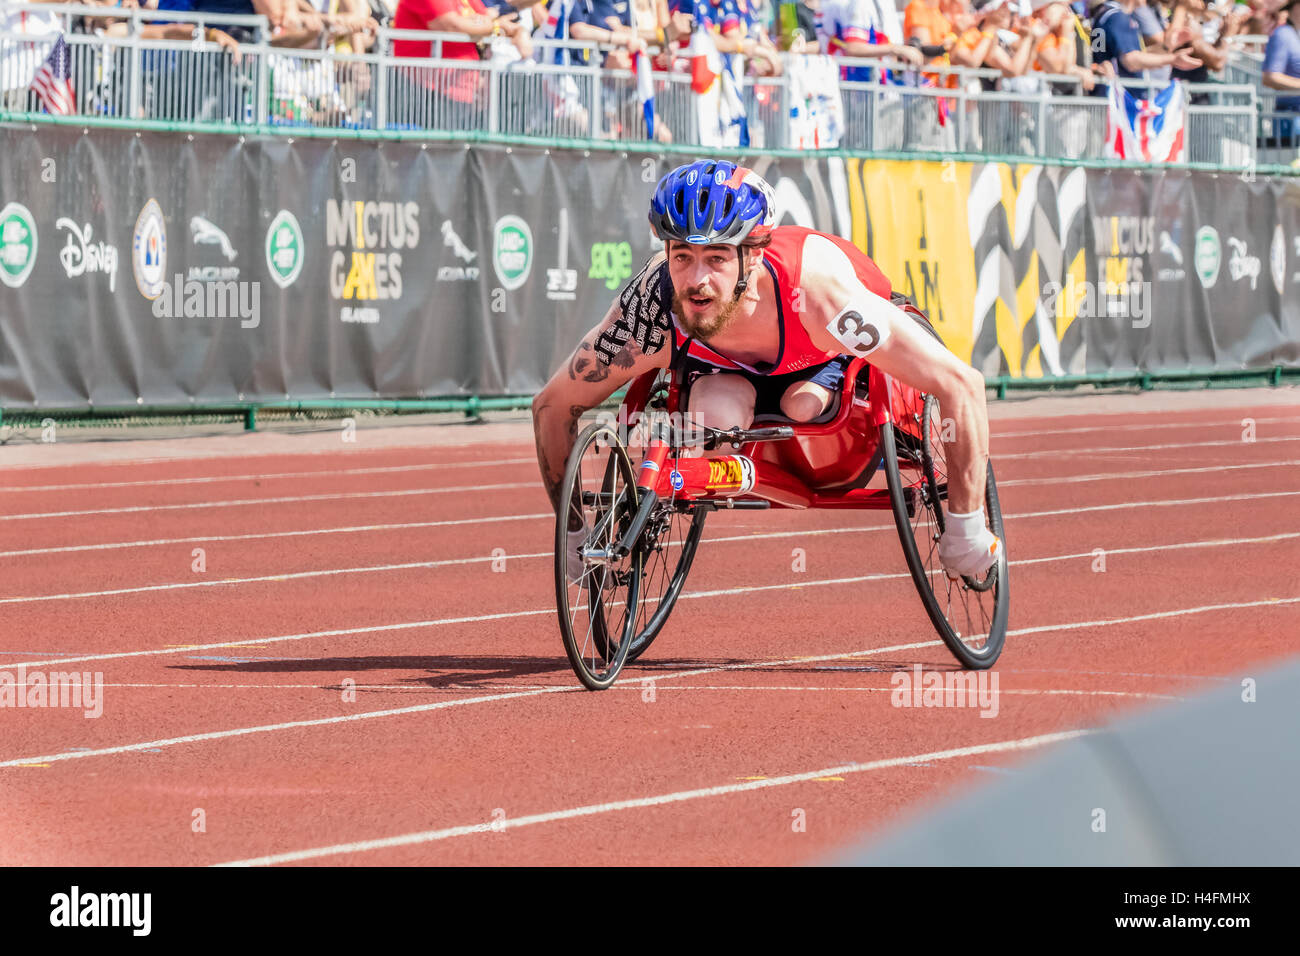 Chris Middleton of the United Kingdom competes in a track event during the Invictus Games on May 10, 2016 at ESPN Wide World of Sports Complex in Orlando, FL. Stock Photo